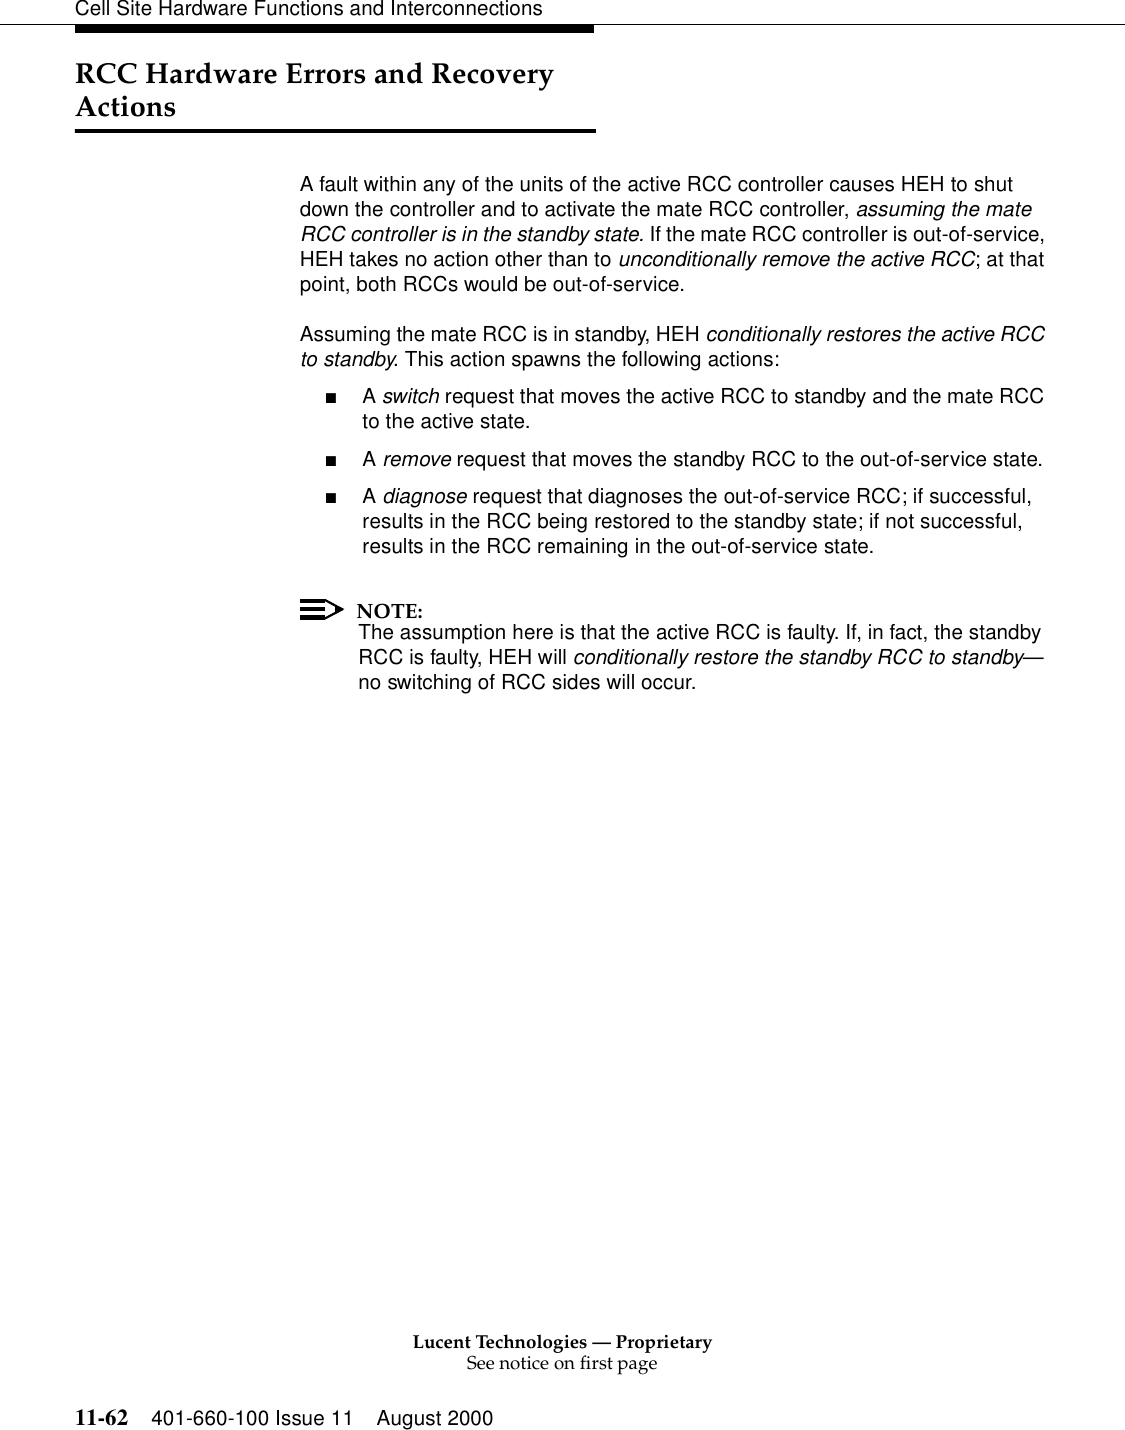 Lucent Technologies — ProprietarySee notice on first page11-62 401-660-100 Issue 11 August 2000Cell Site Hardware Functions and InterconnectionsRCC Hardware Errors and Recovery ActionsA fault within any of the units of the active RCC controller causes HEH to shut down the controller and to activate the mate RCC controller, assuming the mate RCC controller is in the standby state. If the mate RCC controller is out-of-service, HEH takes no action other than to unconditionally remove the active RCC; at that point, both RCCs would be out-of-service.Assuming the mate RCC is in standby, HEH conditionally restores the active RCC to standby. This action spawns the following actions:■A switch request that moves the active RCC to standby and the mate RCC to the active state.■A remove request that moves the standby RCC to the out-of-service state.■A diagnose request that diagnoses the out-of-service RCC; if successful, results in the RCC being restored to the standby state; if not successful, results in the RCC remaining in the out-of-service state.NOTE:The assumption here is that the active RCC is faulty. If, in fact, the standby RCC is faulty, HEH will conditionally restore the standby RCC to standby—no switching of RCC sides will occur.